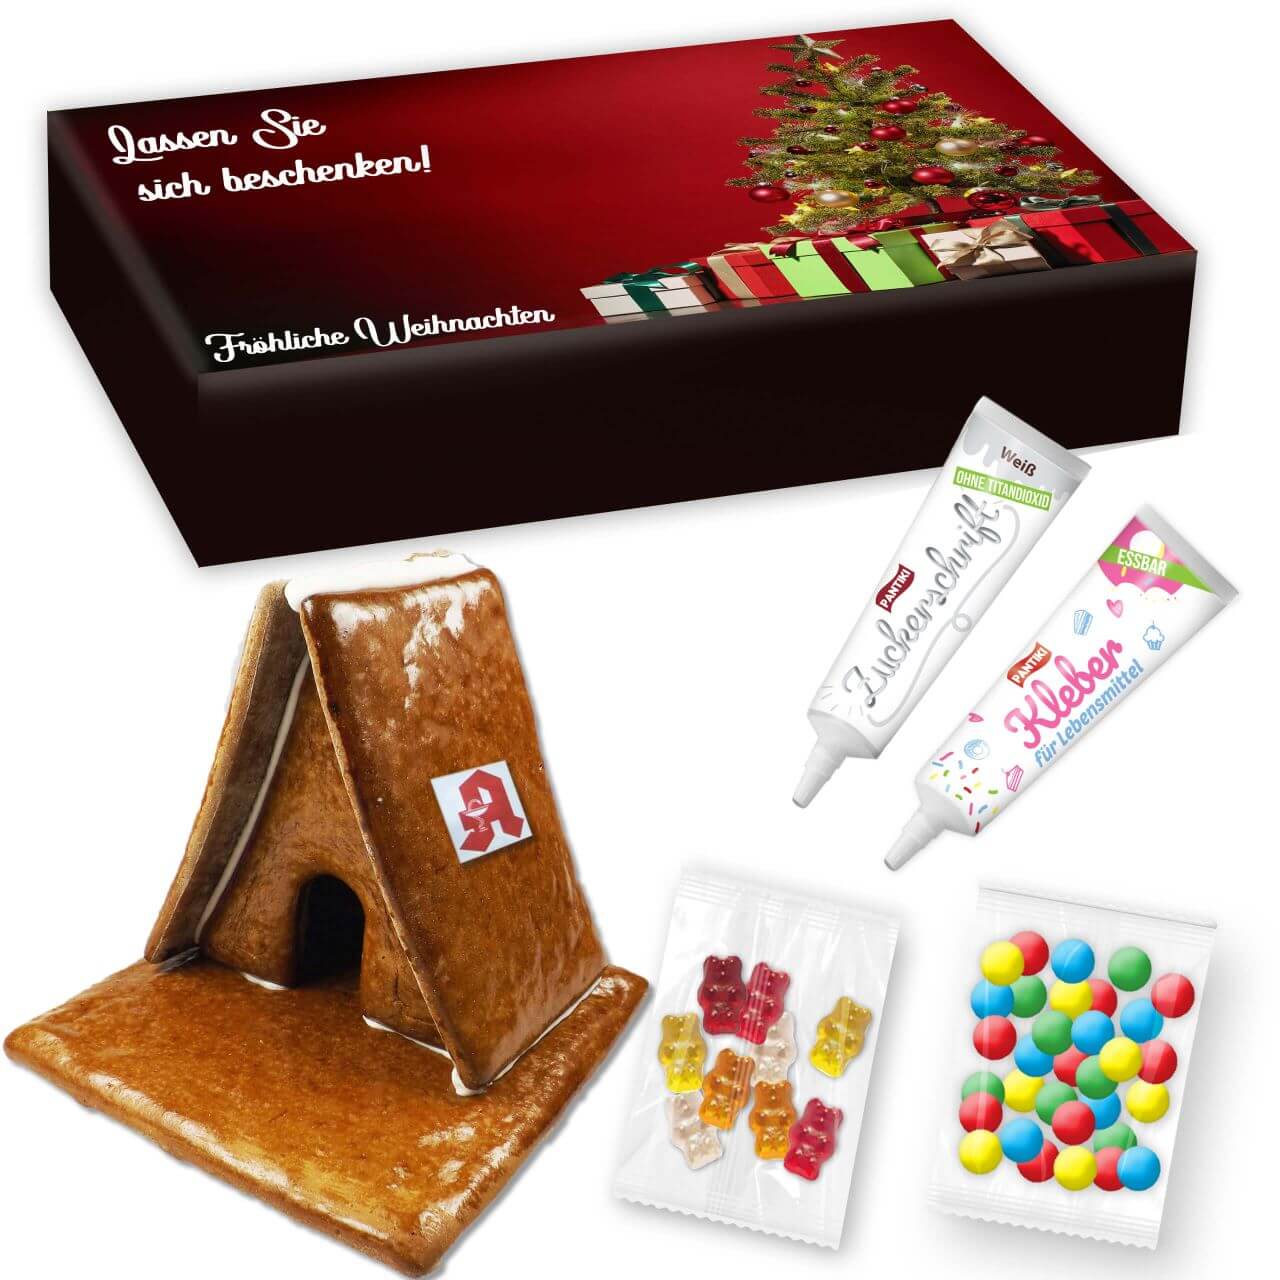 Gingerbread house complete set L in printed advertising box